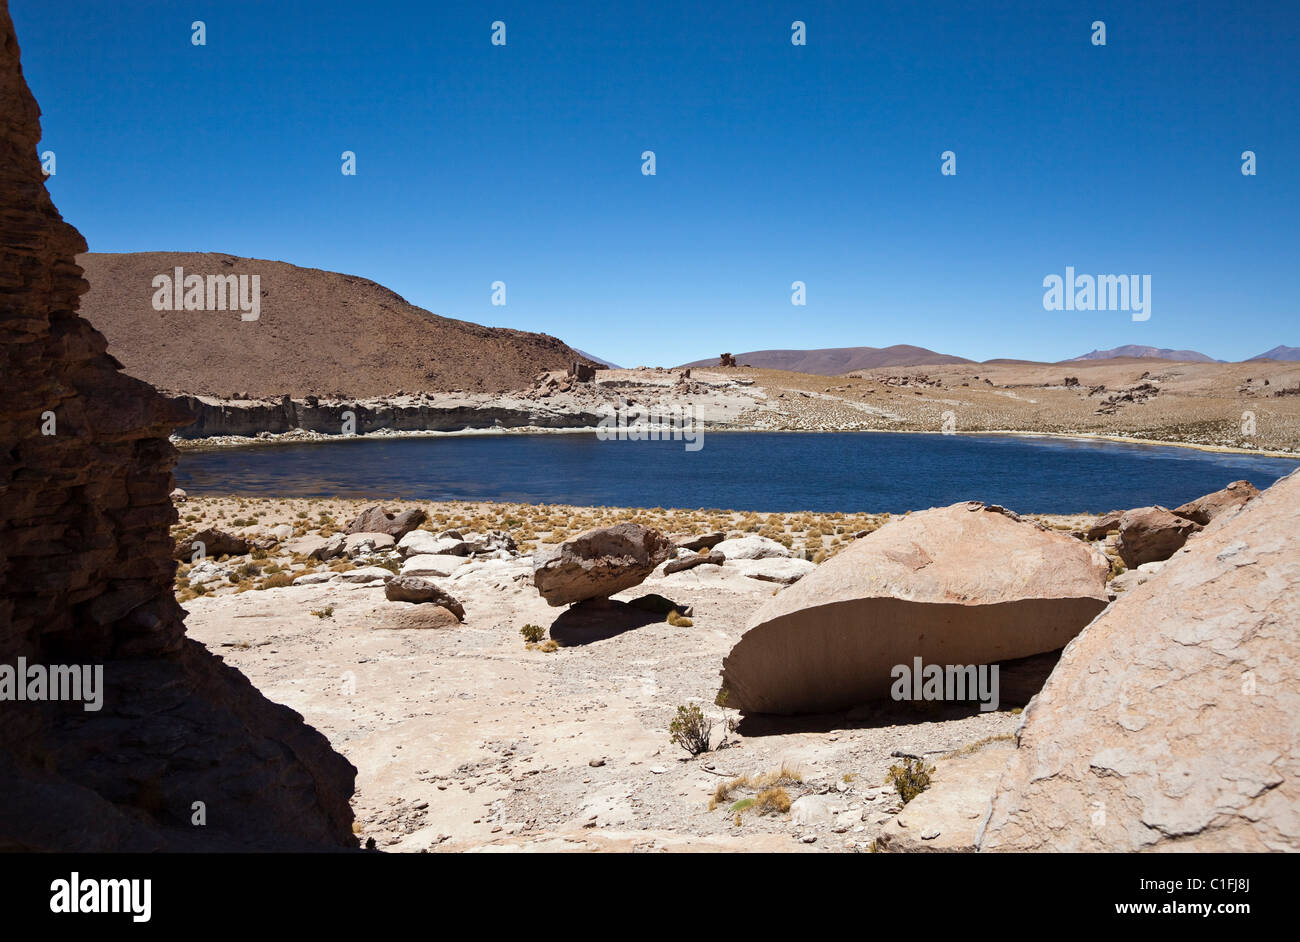 Lake and rock formations in Southern Bolivia, South America. Stock Photo